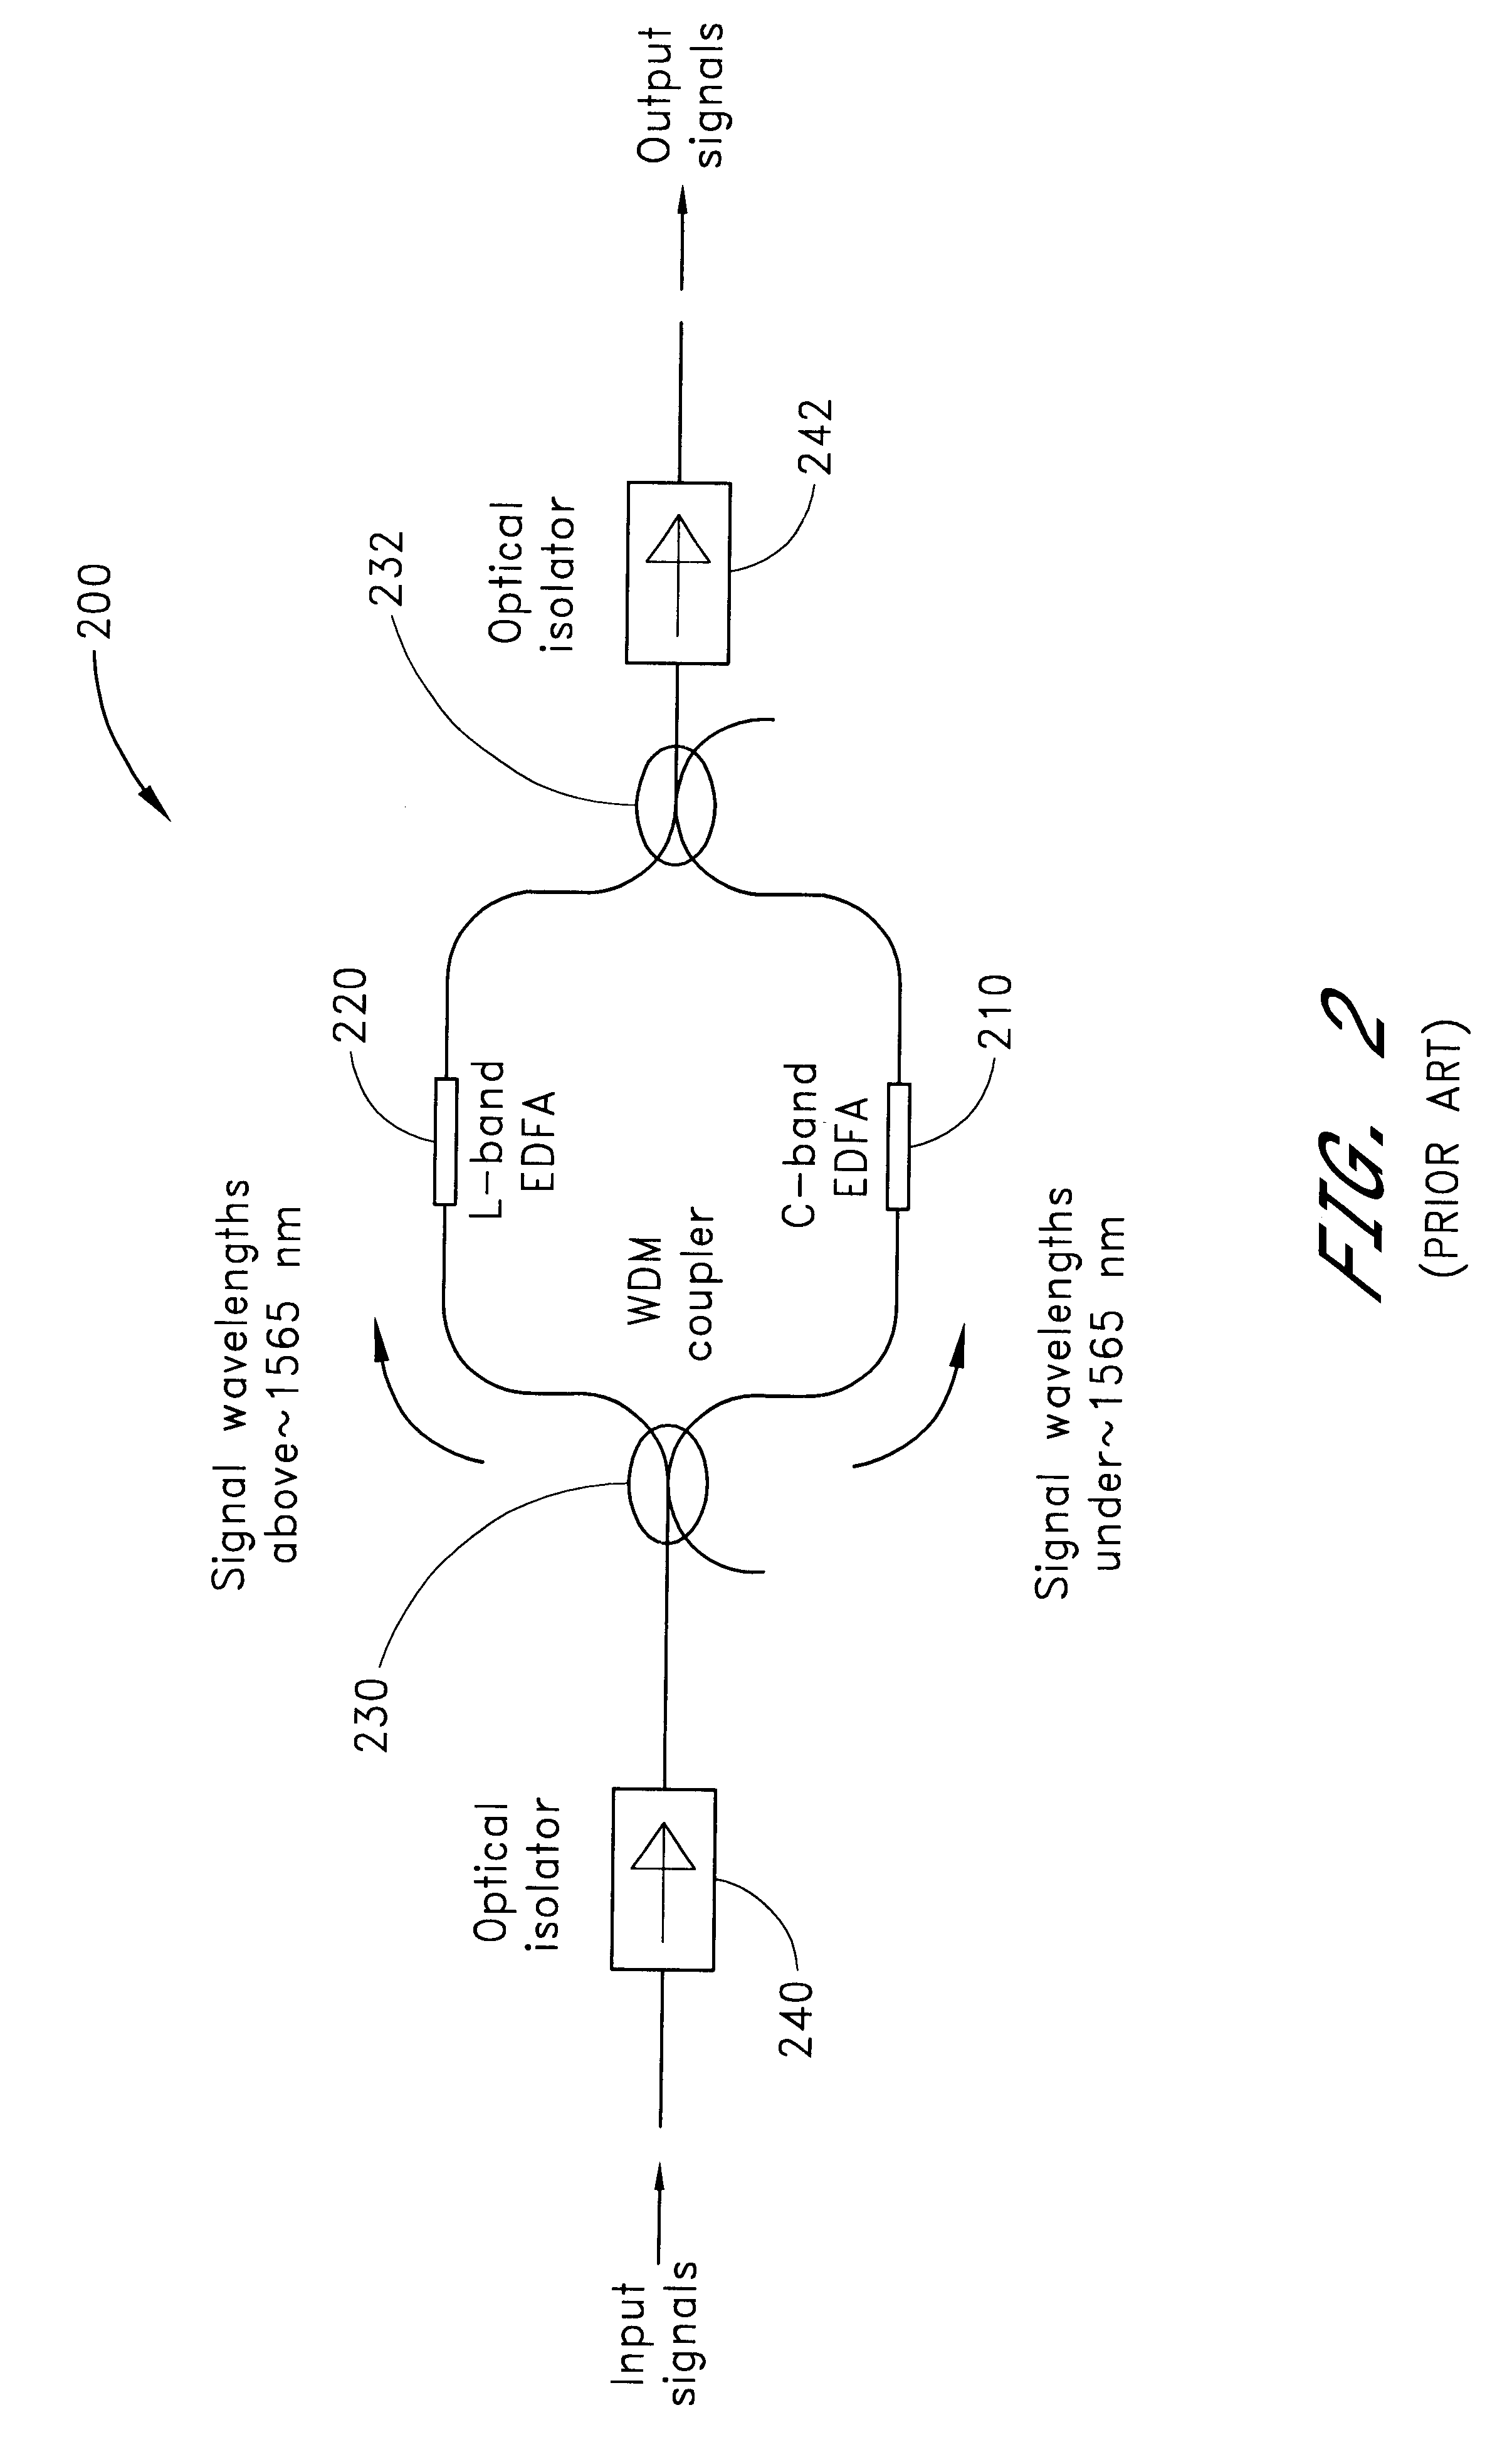 Method of amplifying optical signals using doped materials with extremely broad bandwidths